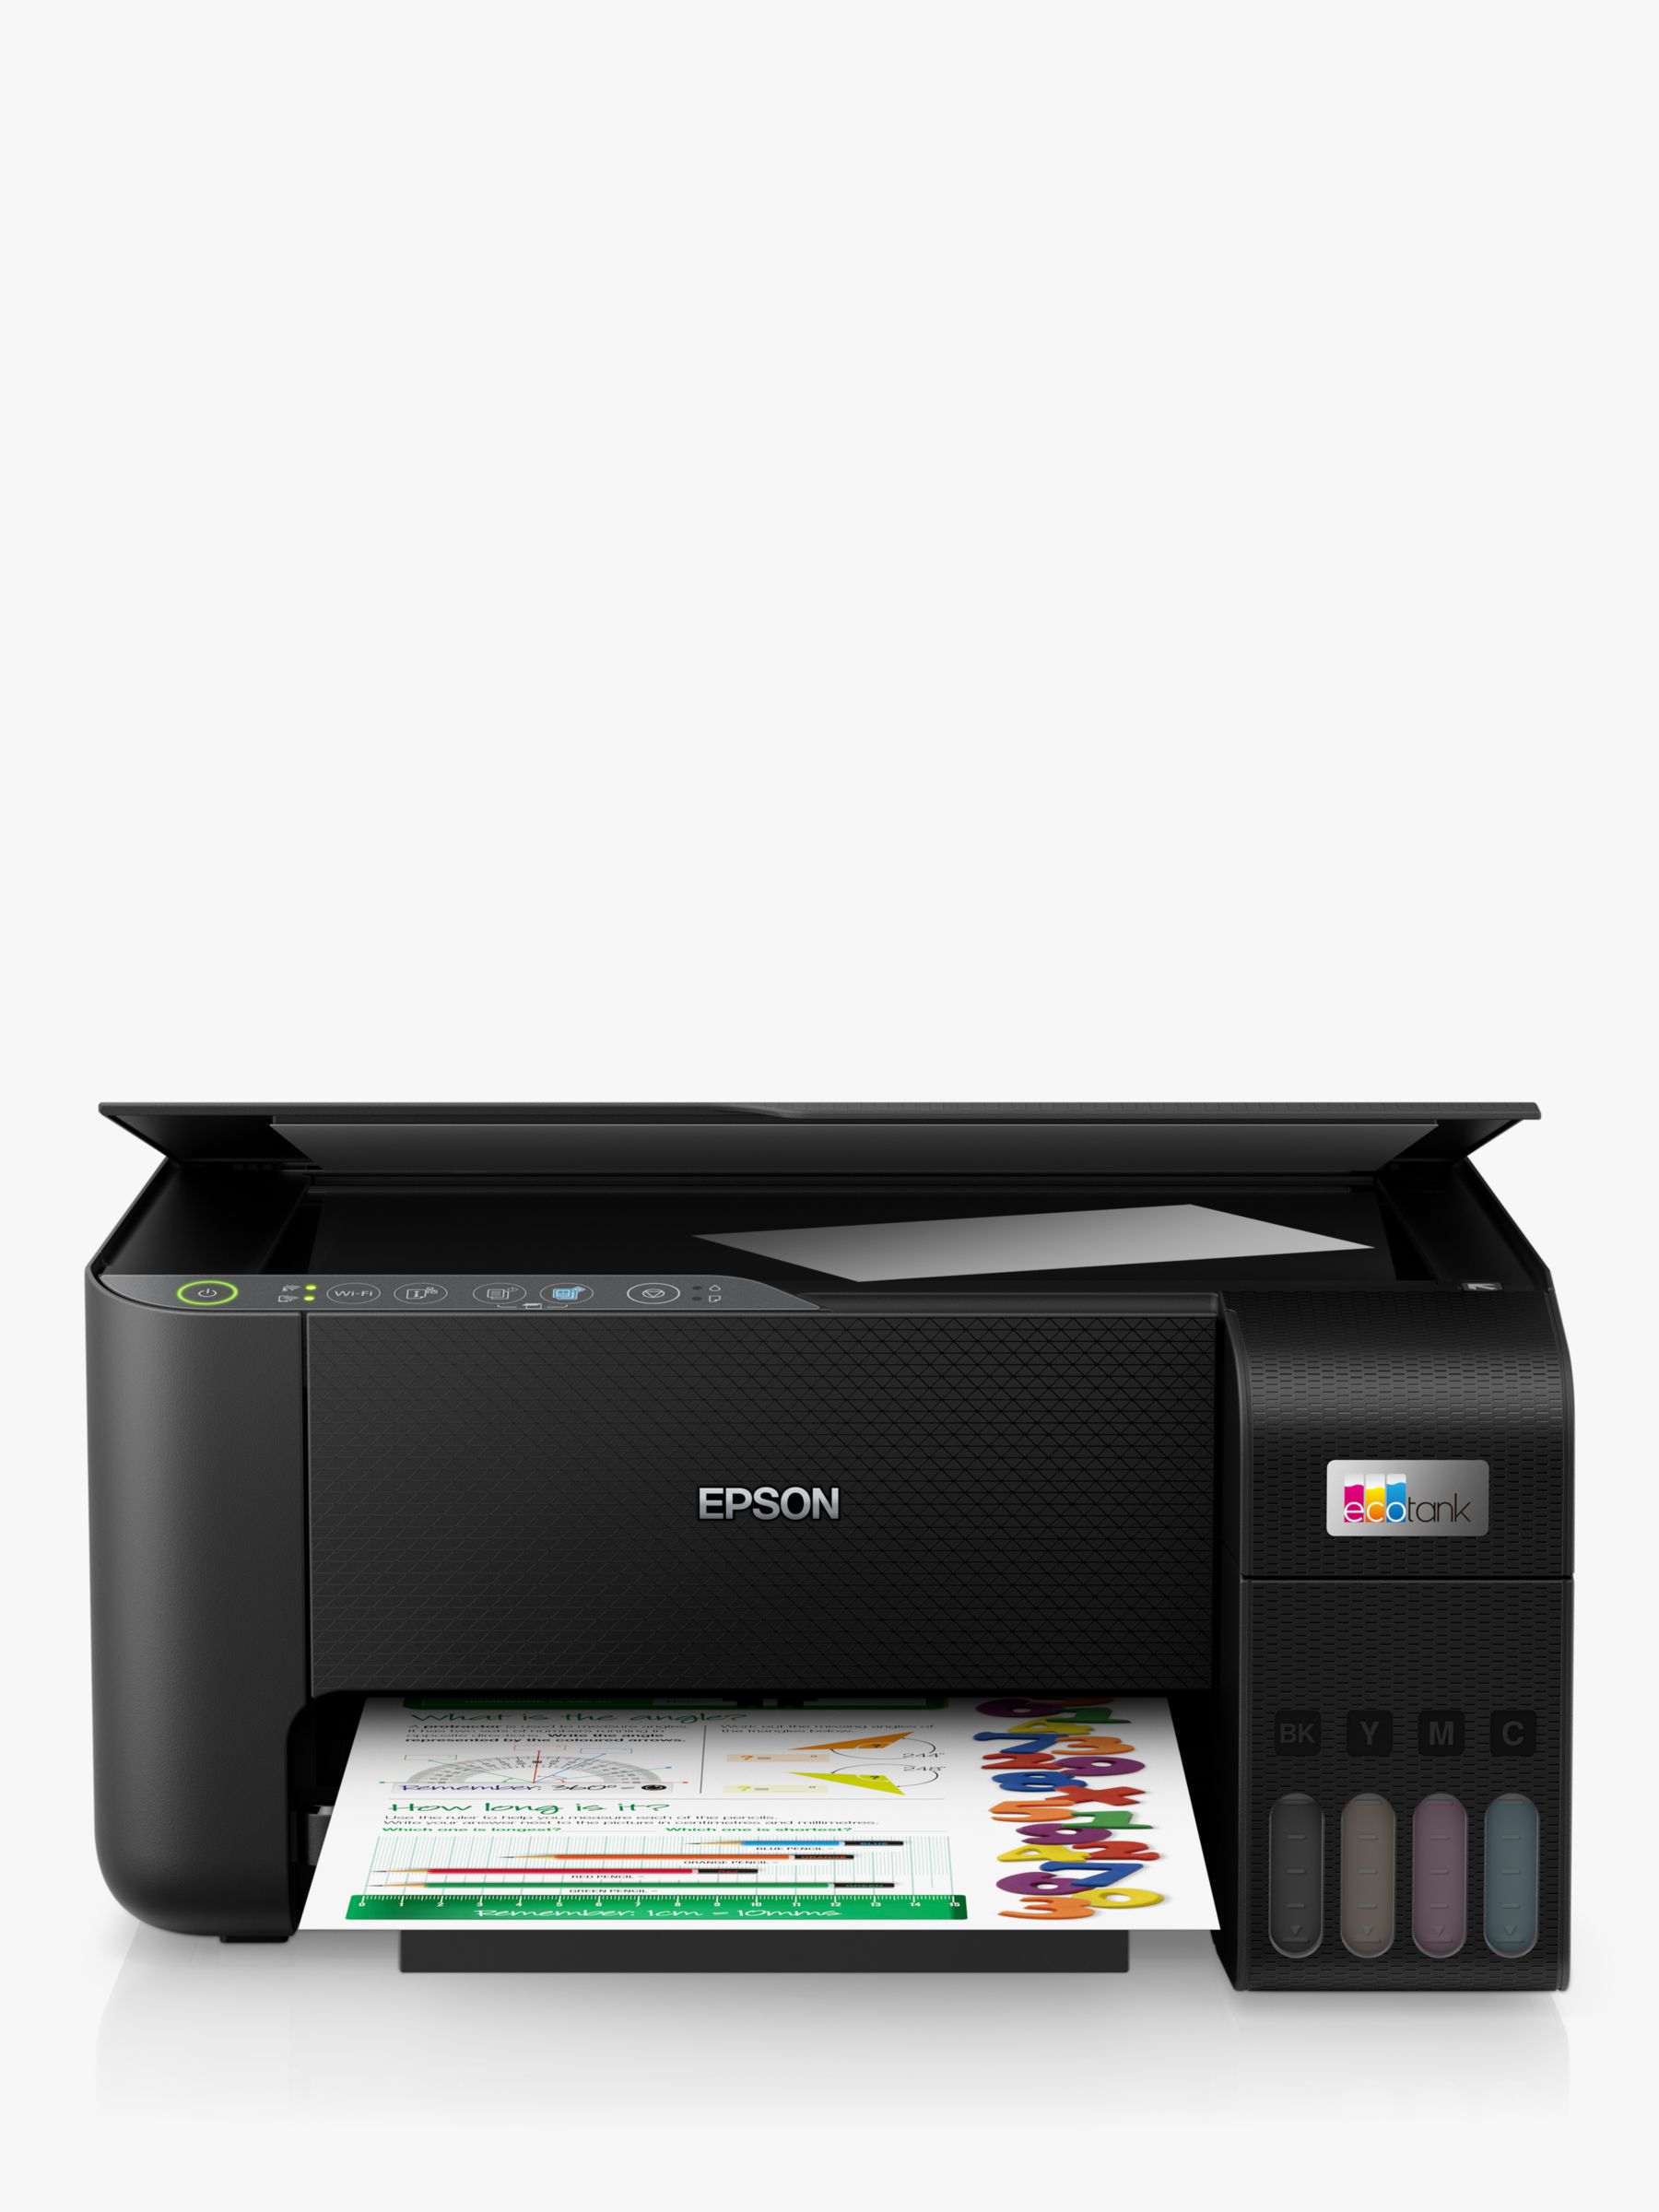 Epson Ecotank Et 2811 Three In One Wi Fi Printer With High Capacity Integrated Ink Tank System 9866